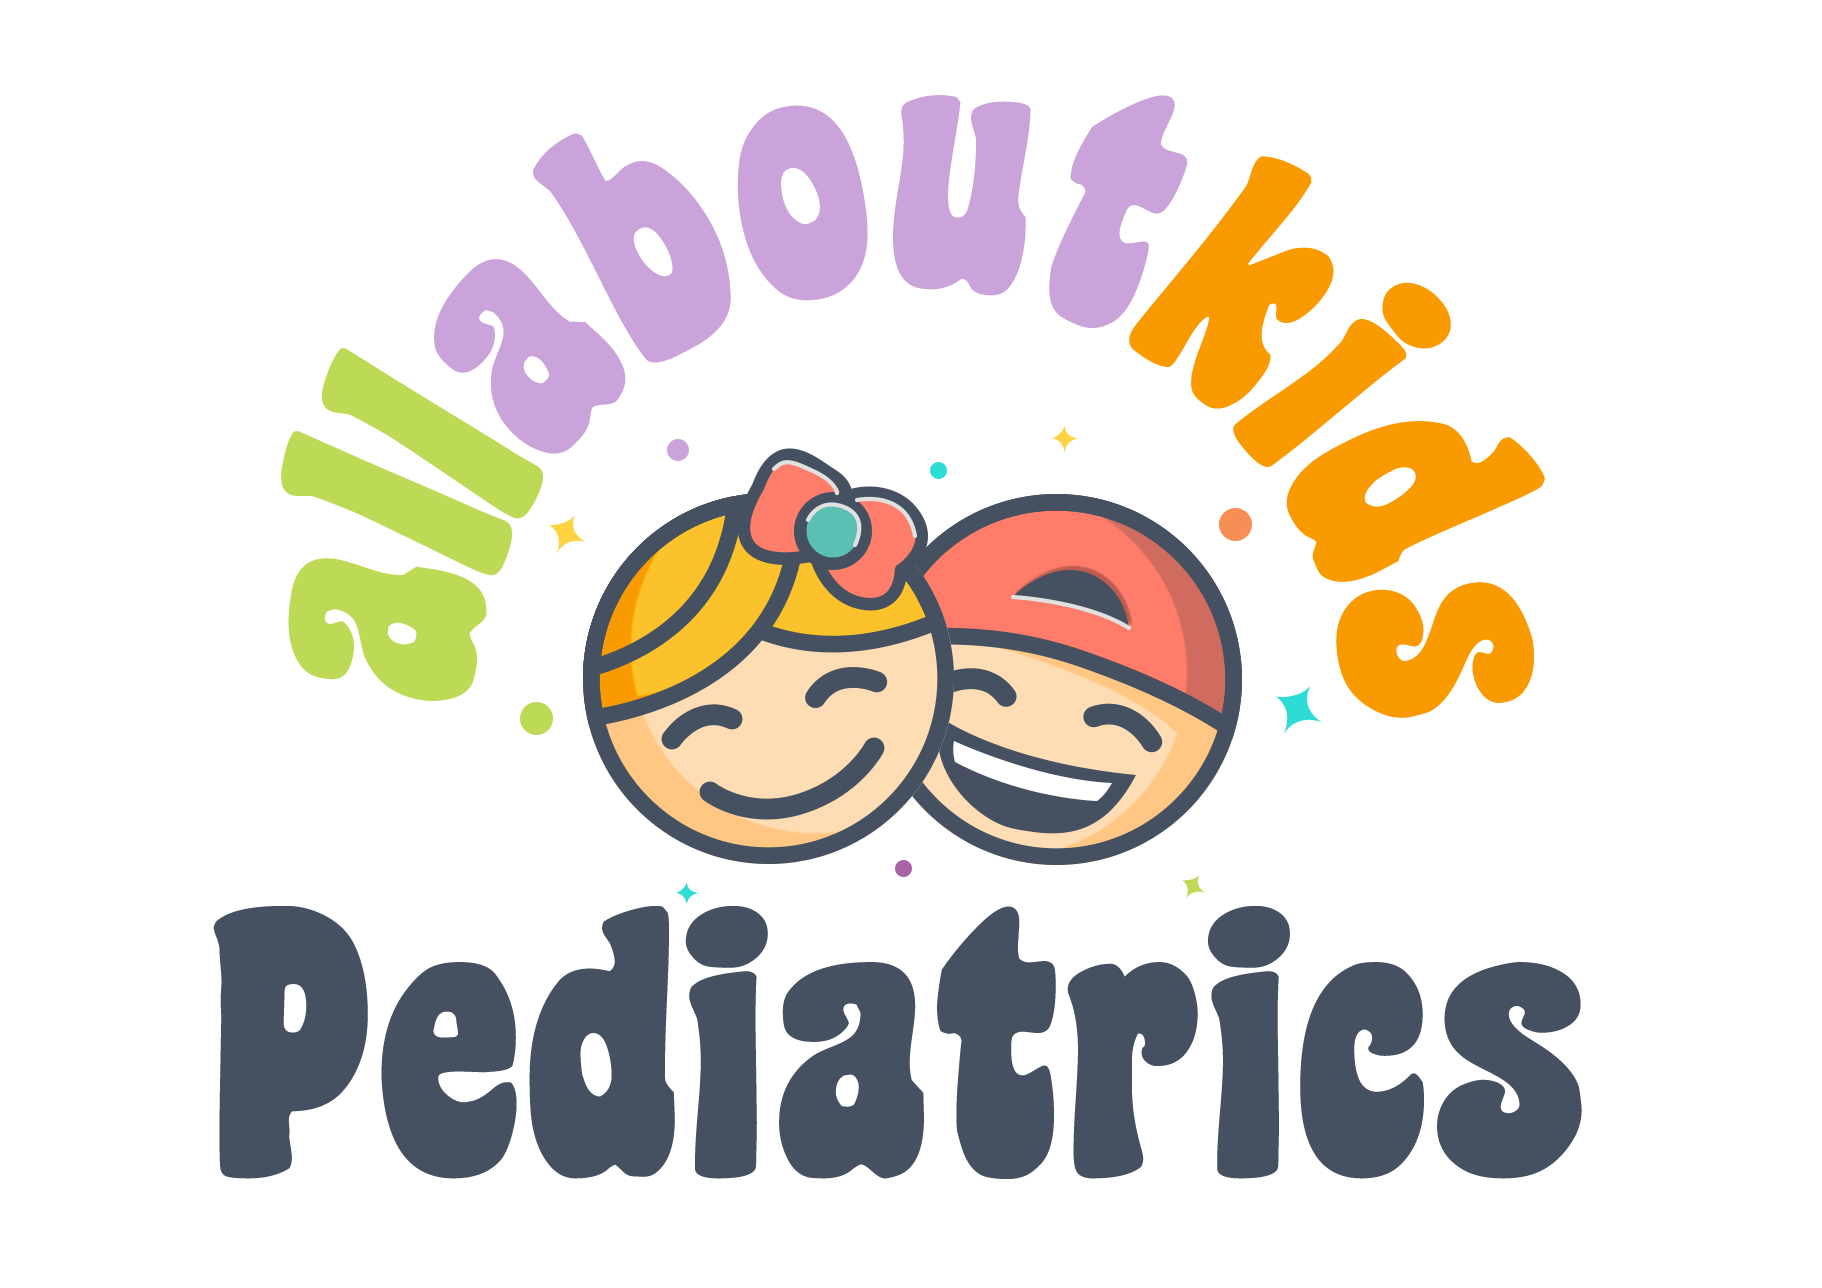 All About Kids Pediatrics in Frederick, MD logo